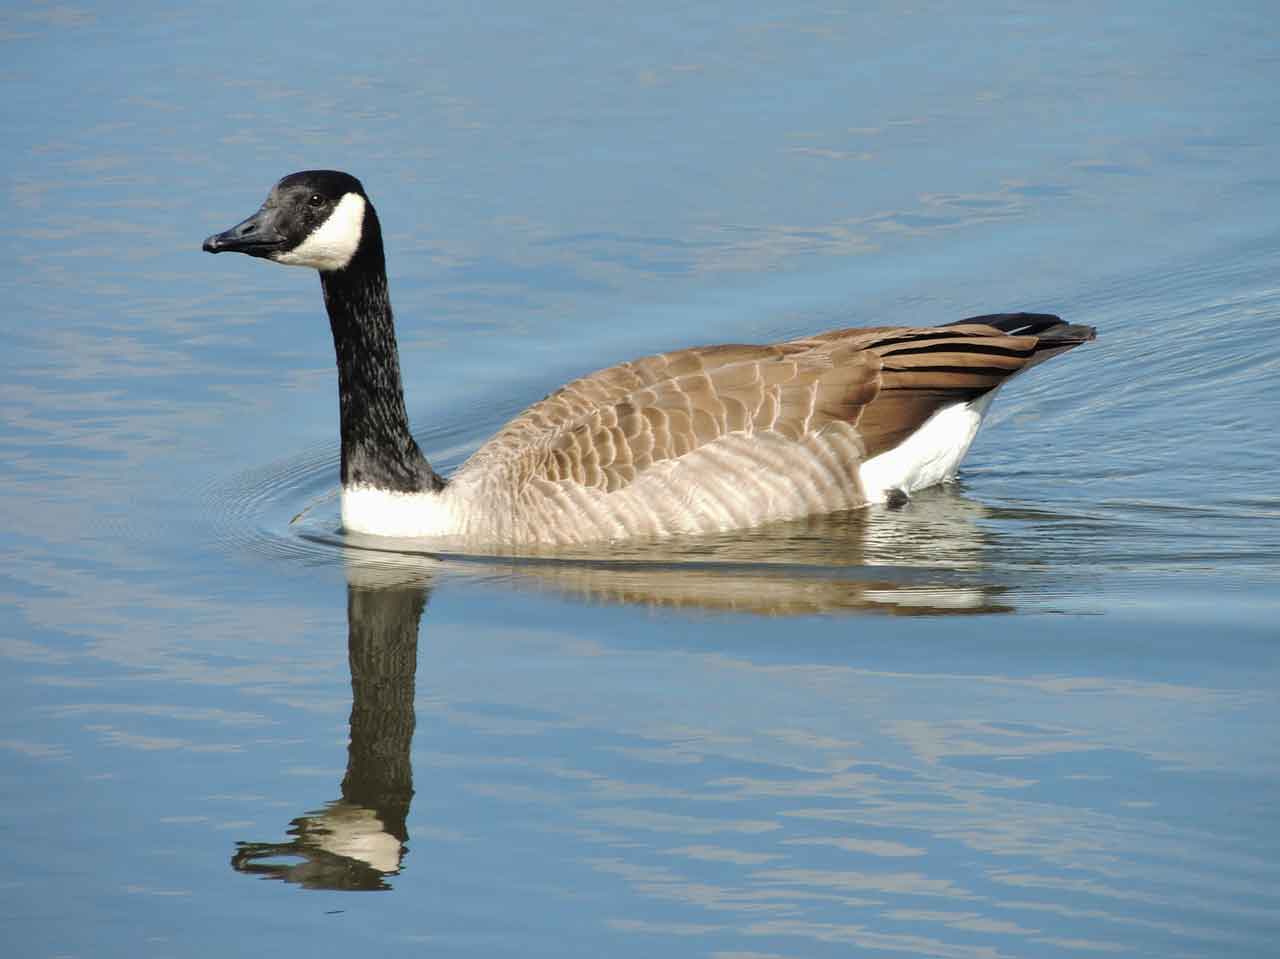 A Canadian Goose swimming in a lake